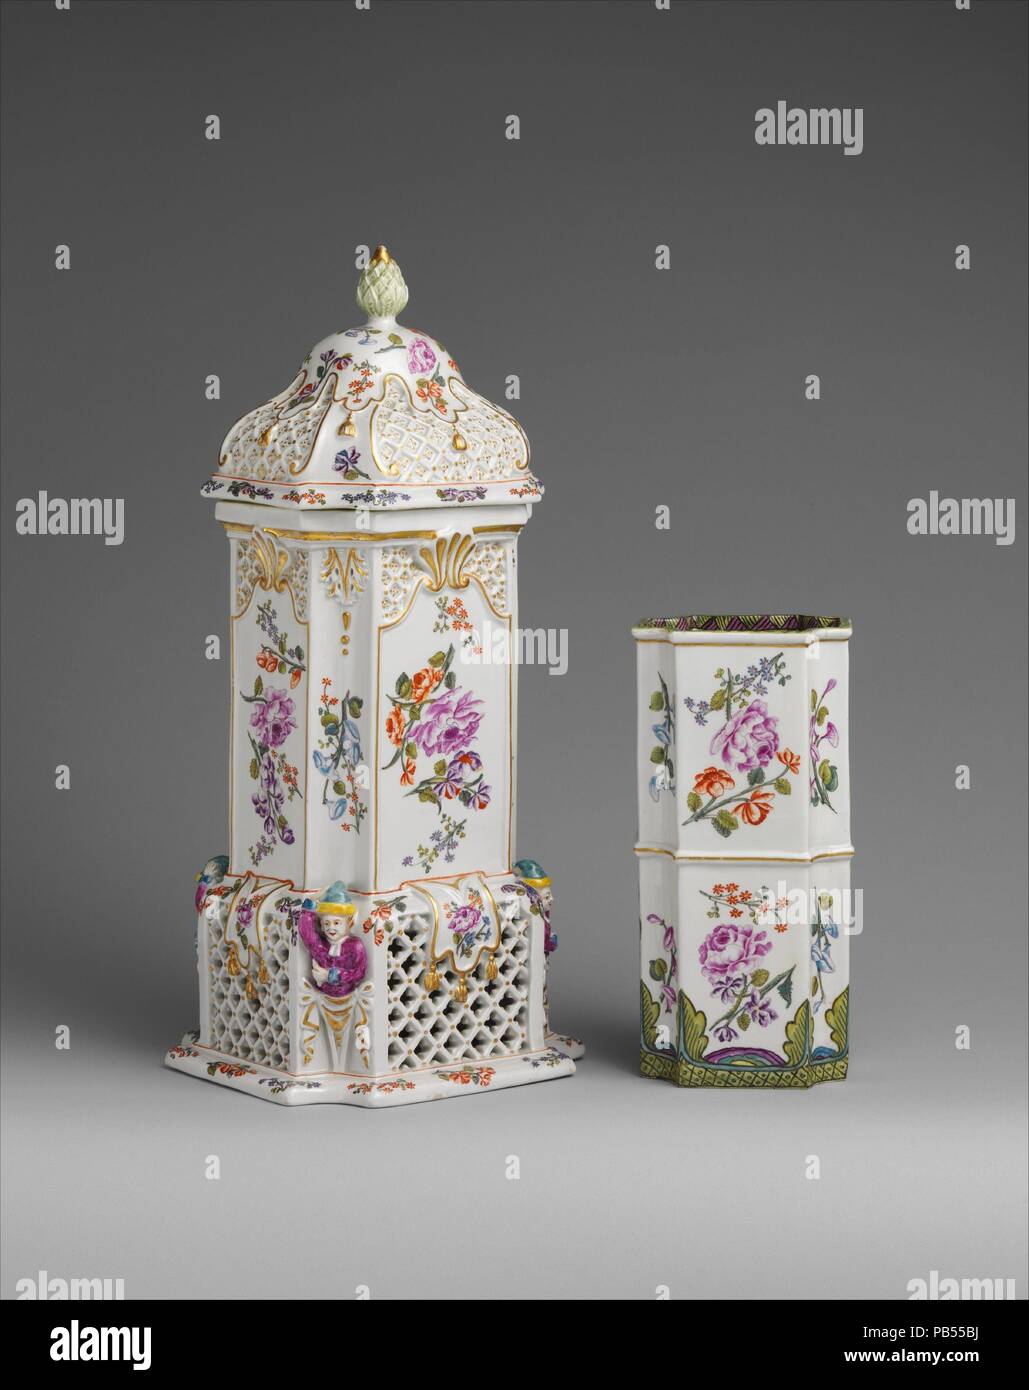 Food warmer with insert. Culture: Austrian, Vienna. Dimensions: Overall (confirmed): 15 9/16 x 6 5/16 x 6 11/16 in. (39.5 x 16 x 17 cm);  Insert: Overall (confirmed): 8 9/16 x 4 1/4 x 3 1/2 in. (21.7 x 10.8 x 8.9 cm);  Other (without cover): 11 in. (27.9cm). Factory: Vienna. Factory director: Du Paquier period (1718-1744). Date: ca. 1730-35.  This vessel was probably intended to be used in the intimate living quarters of a house, which, in the eighteenth century would have been far removed from the kitchen. The porcelain insert once held a metal liner where the food was placed. The heat source Stock Photo